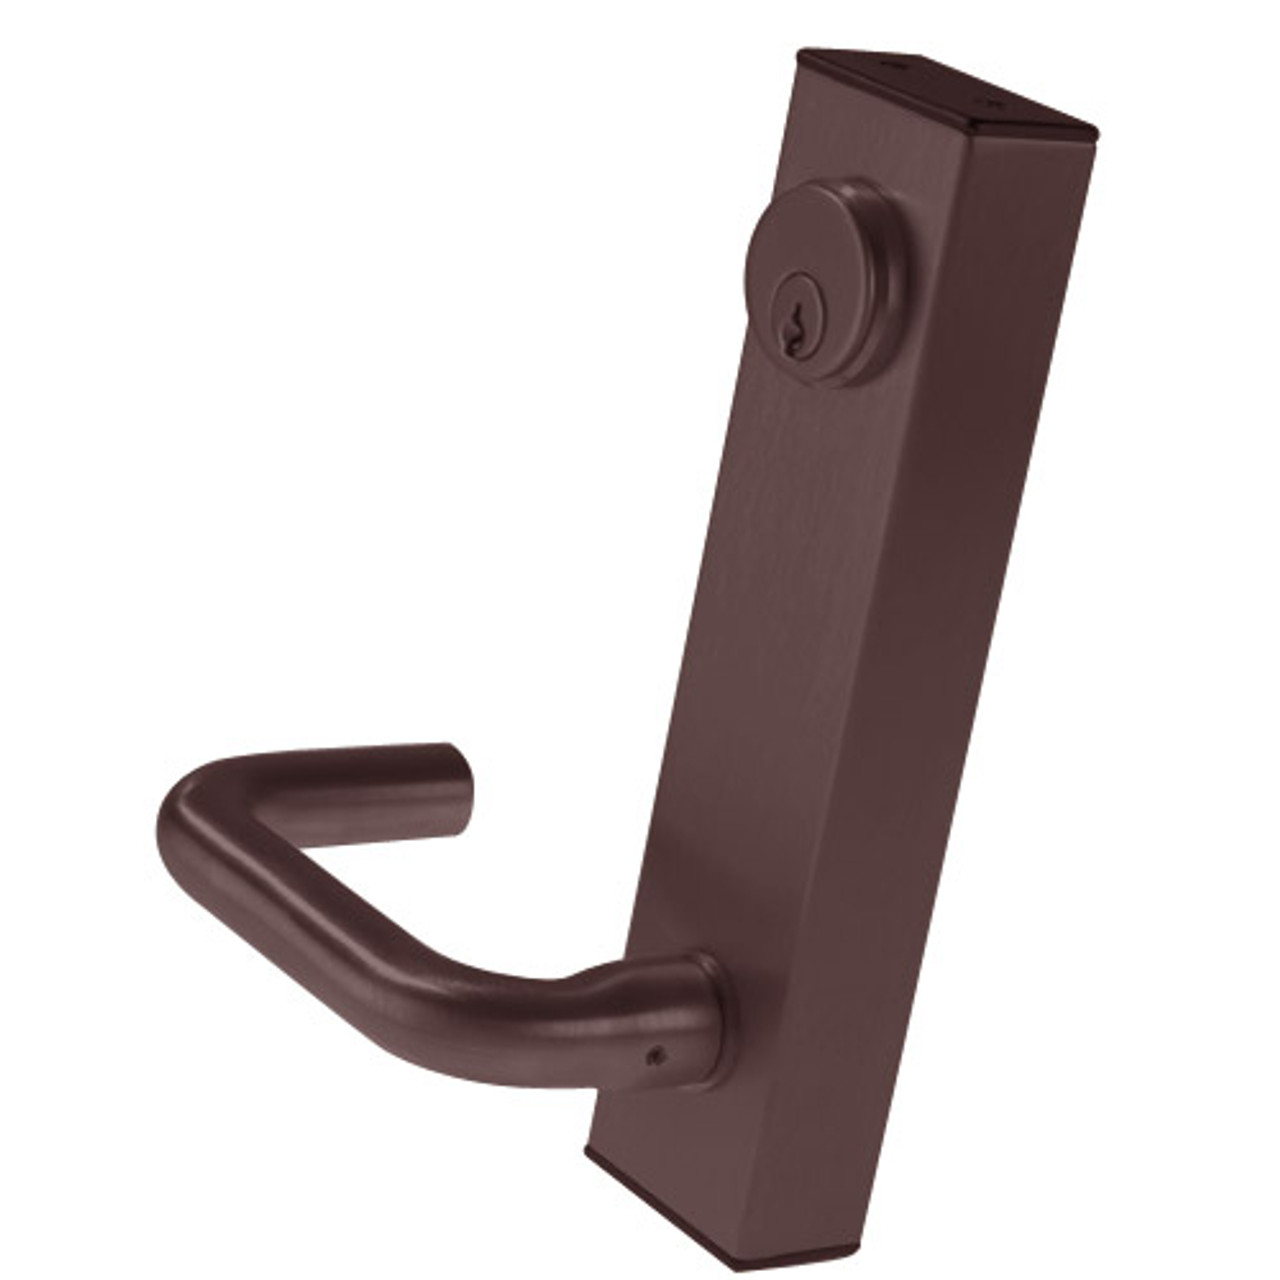 3080-02-0-9U-US10B Adams Rite Standard Entry Trim with Round Lever in Oil Rubbed Bronze Finish